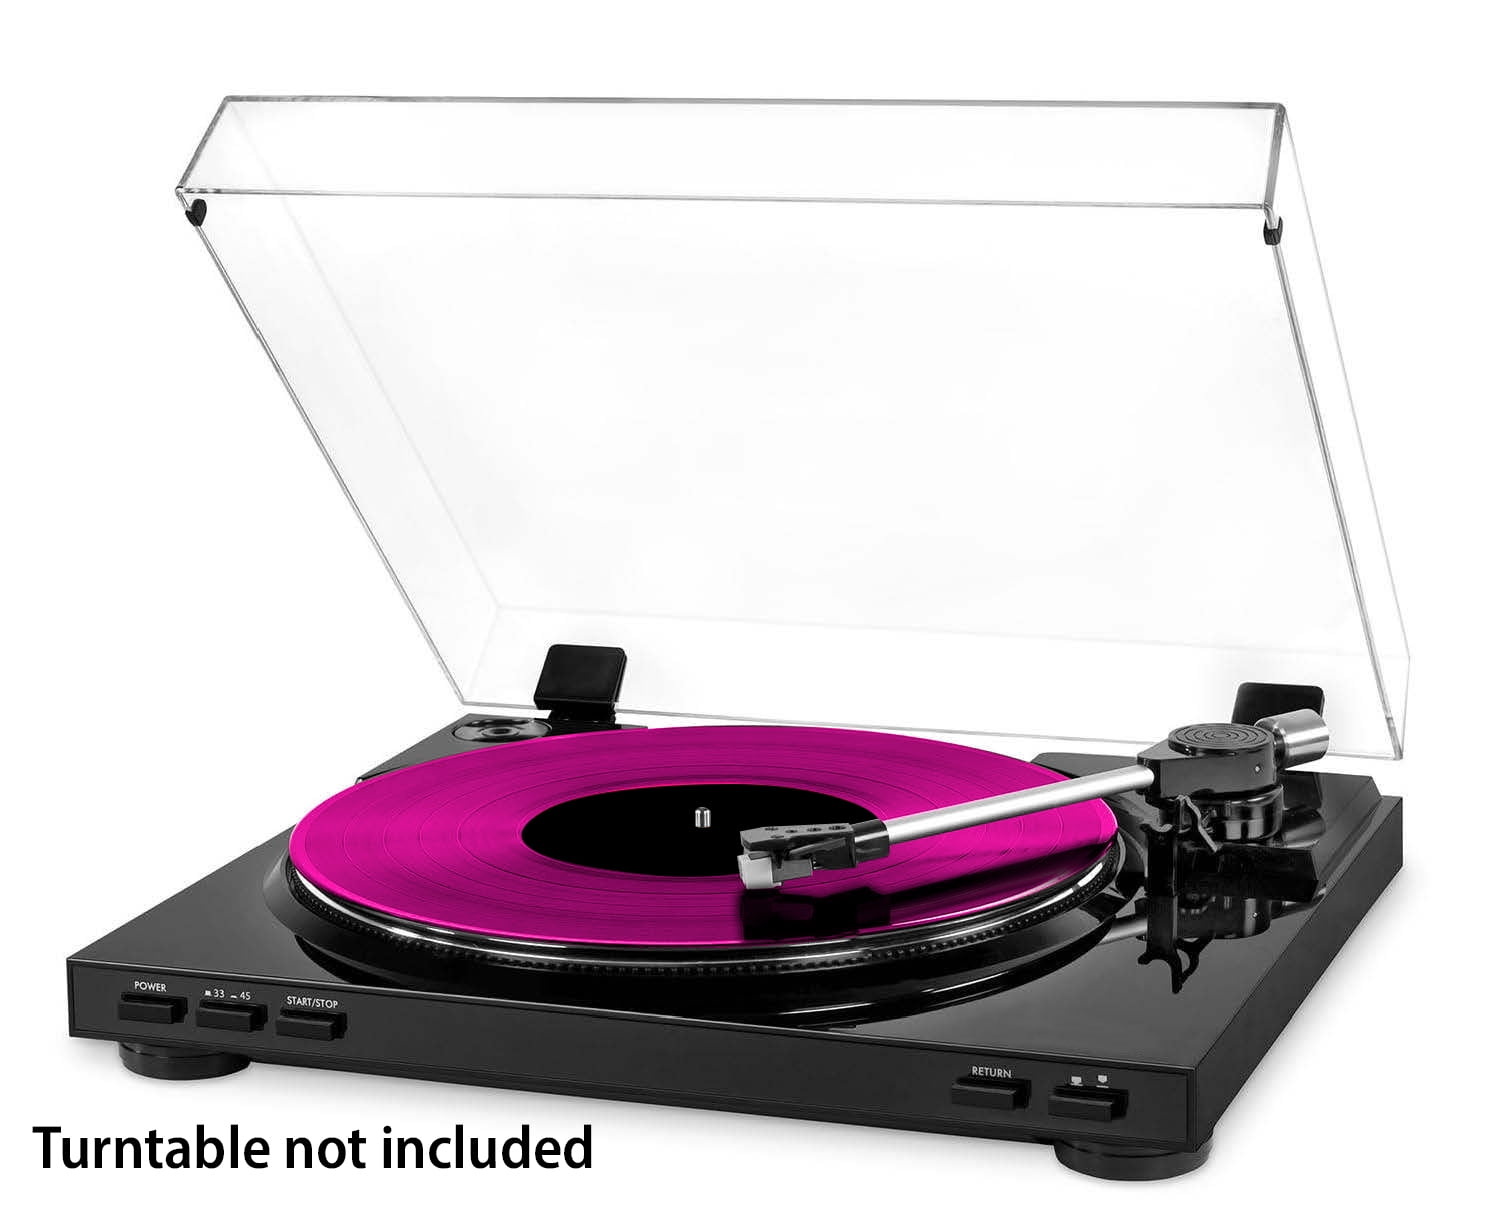 Sour - Exclusive Limited Edition Pink Opaque Colored Vinyl LP